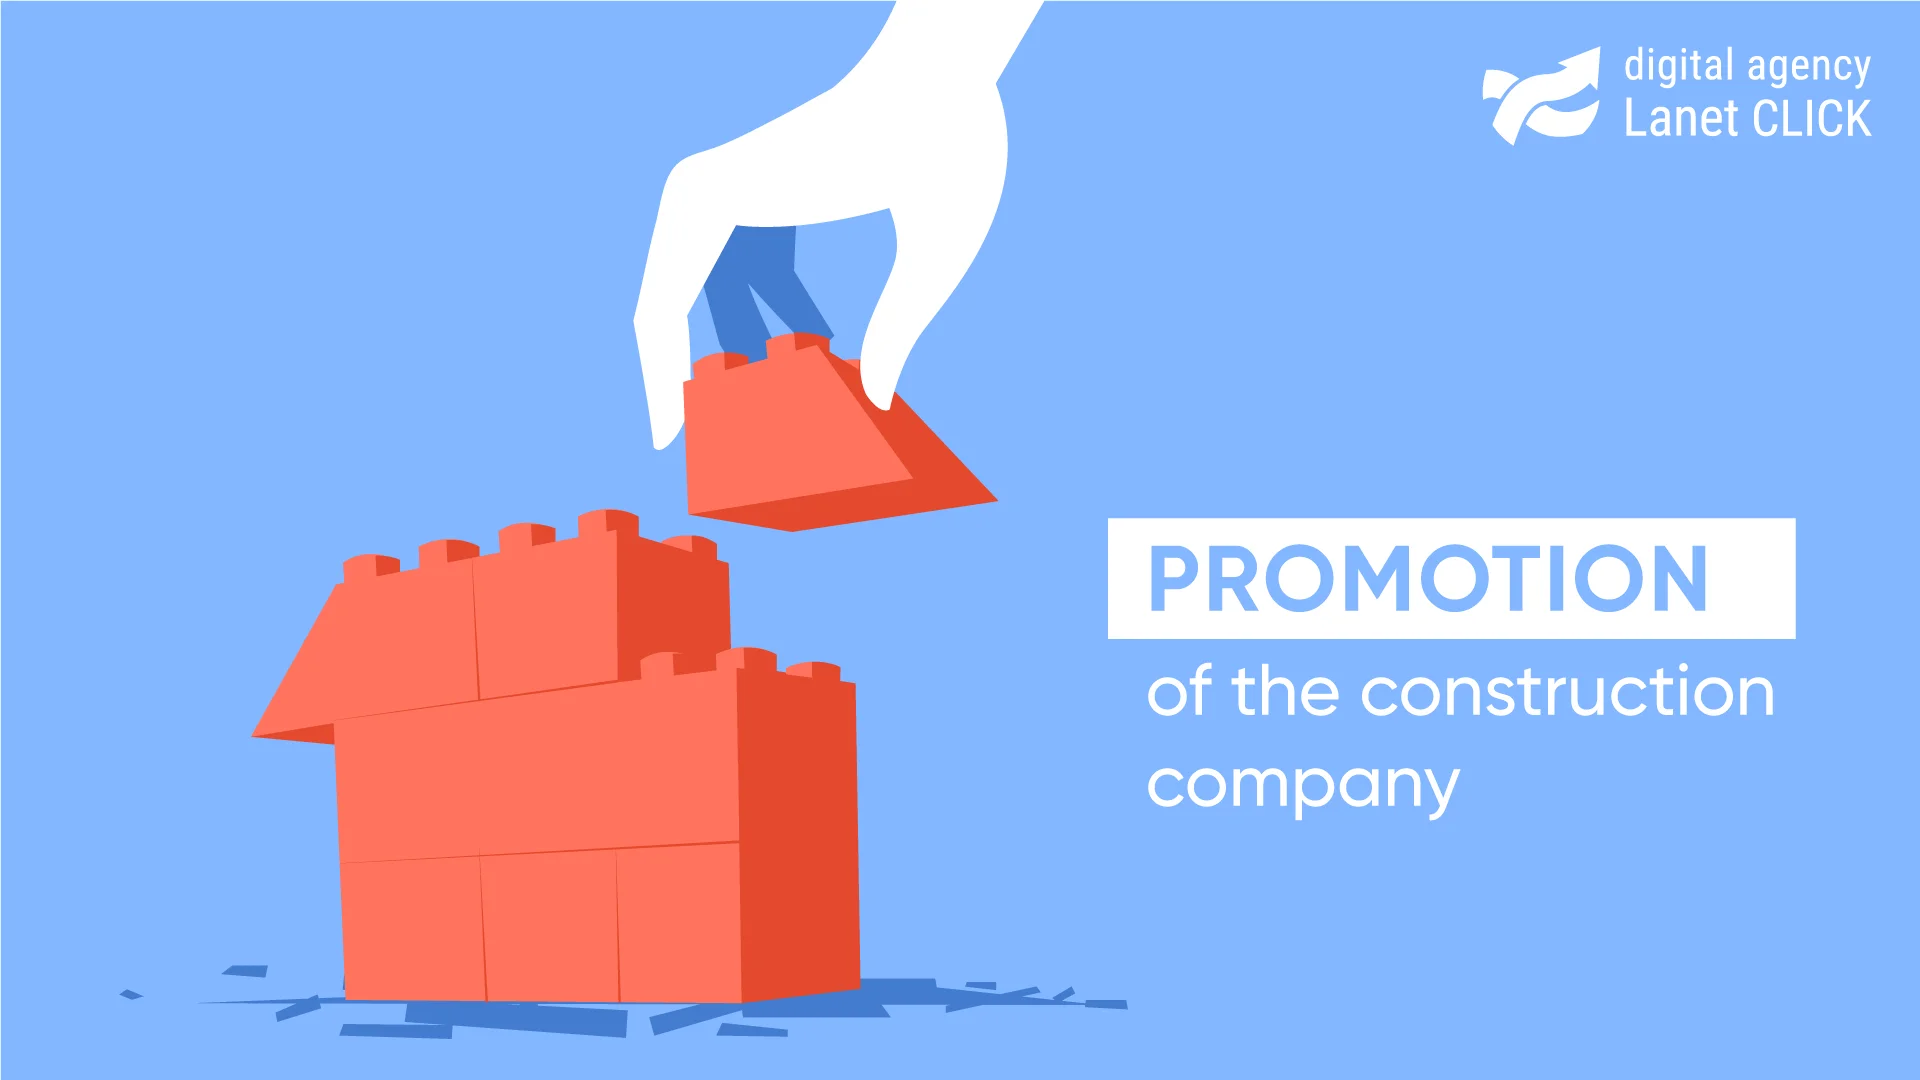 Promotion of the construction company